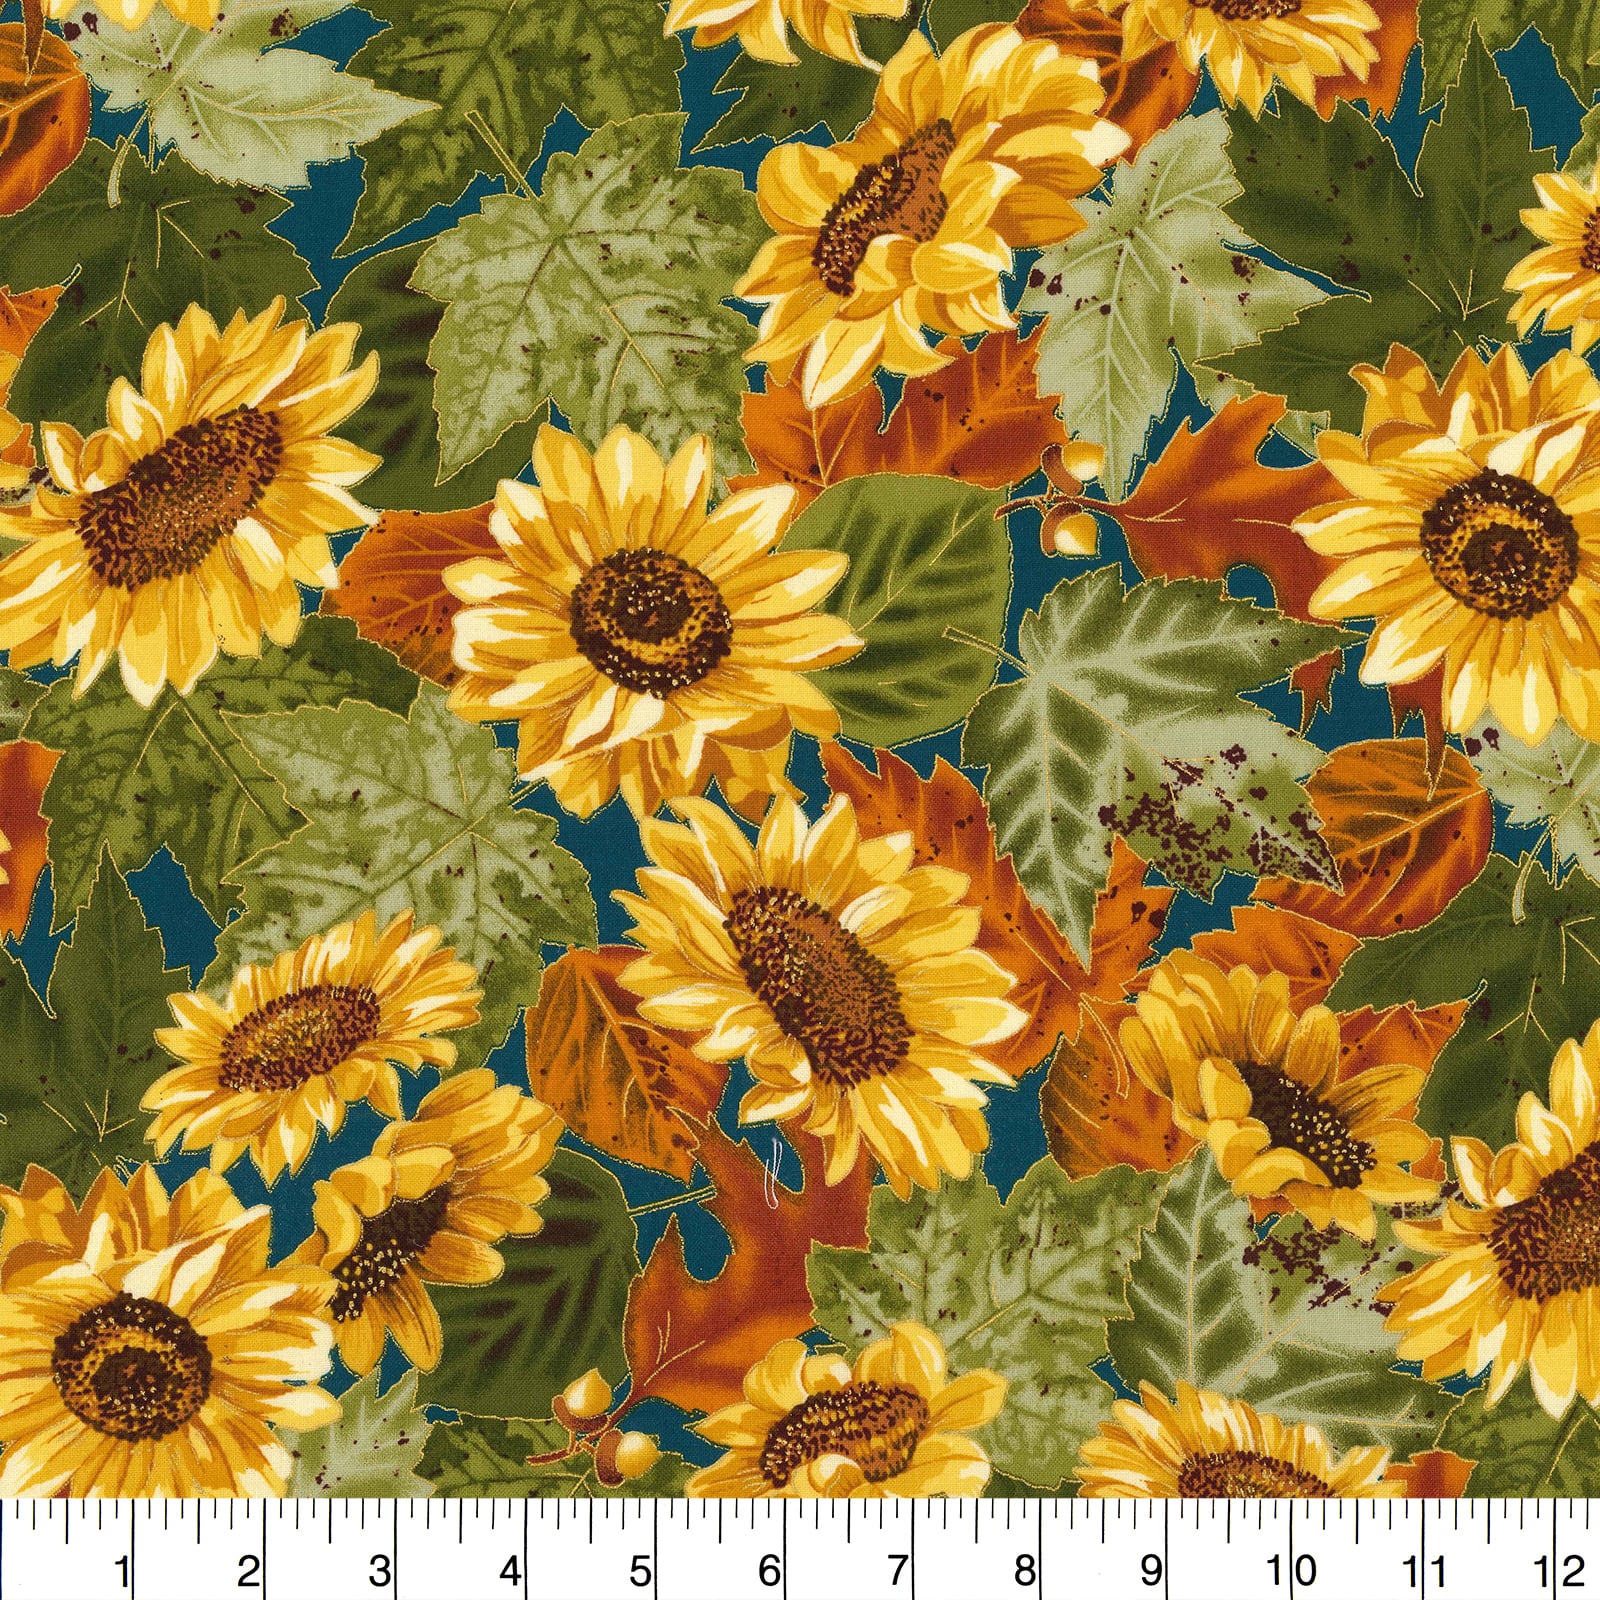 Fabric Cotton 100% Floral Sunflowers Fabric Traditions Sell by 1/2 Yard B1 